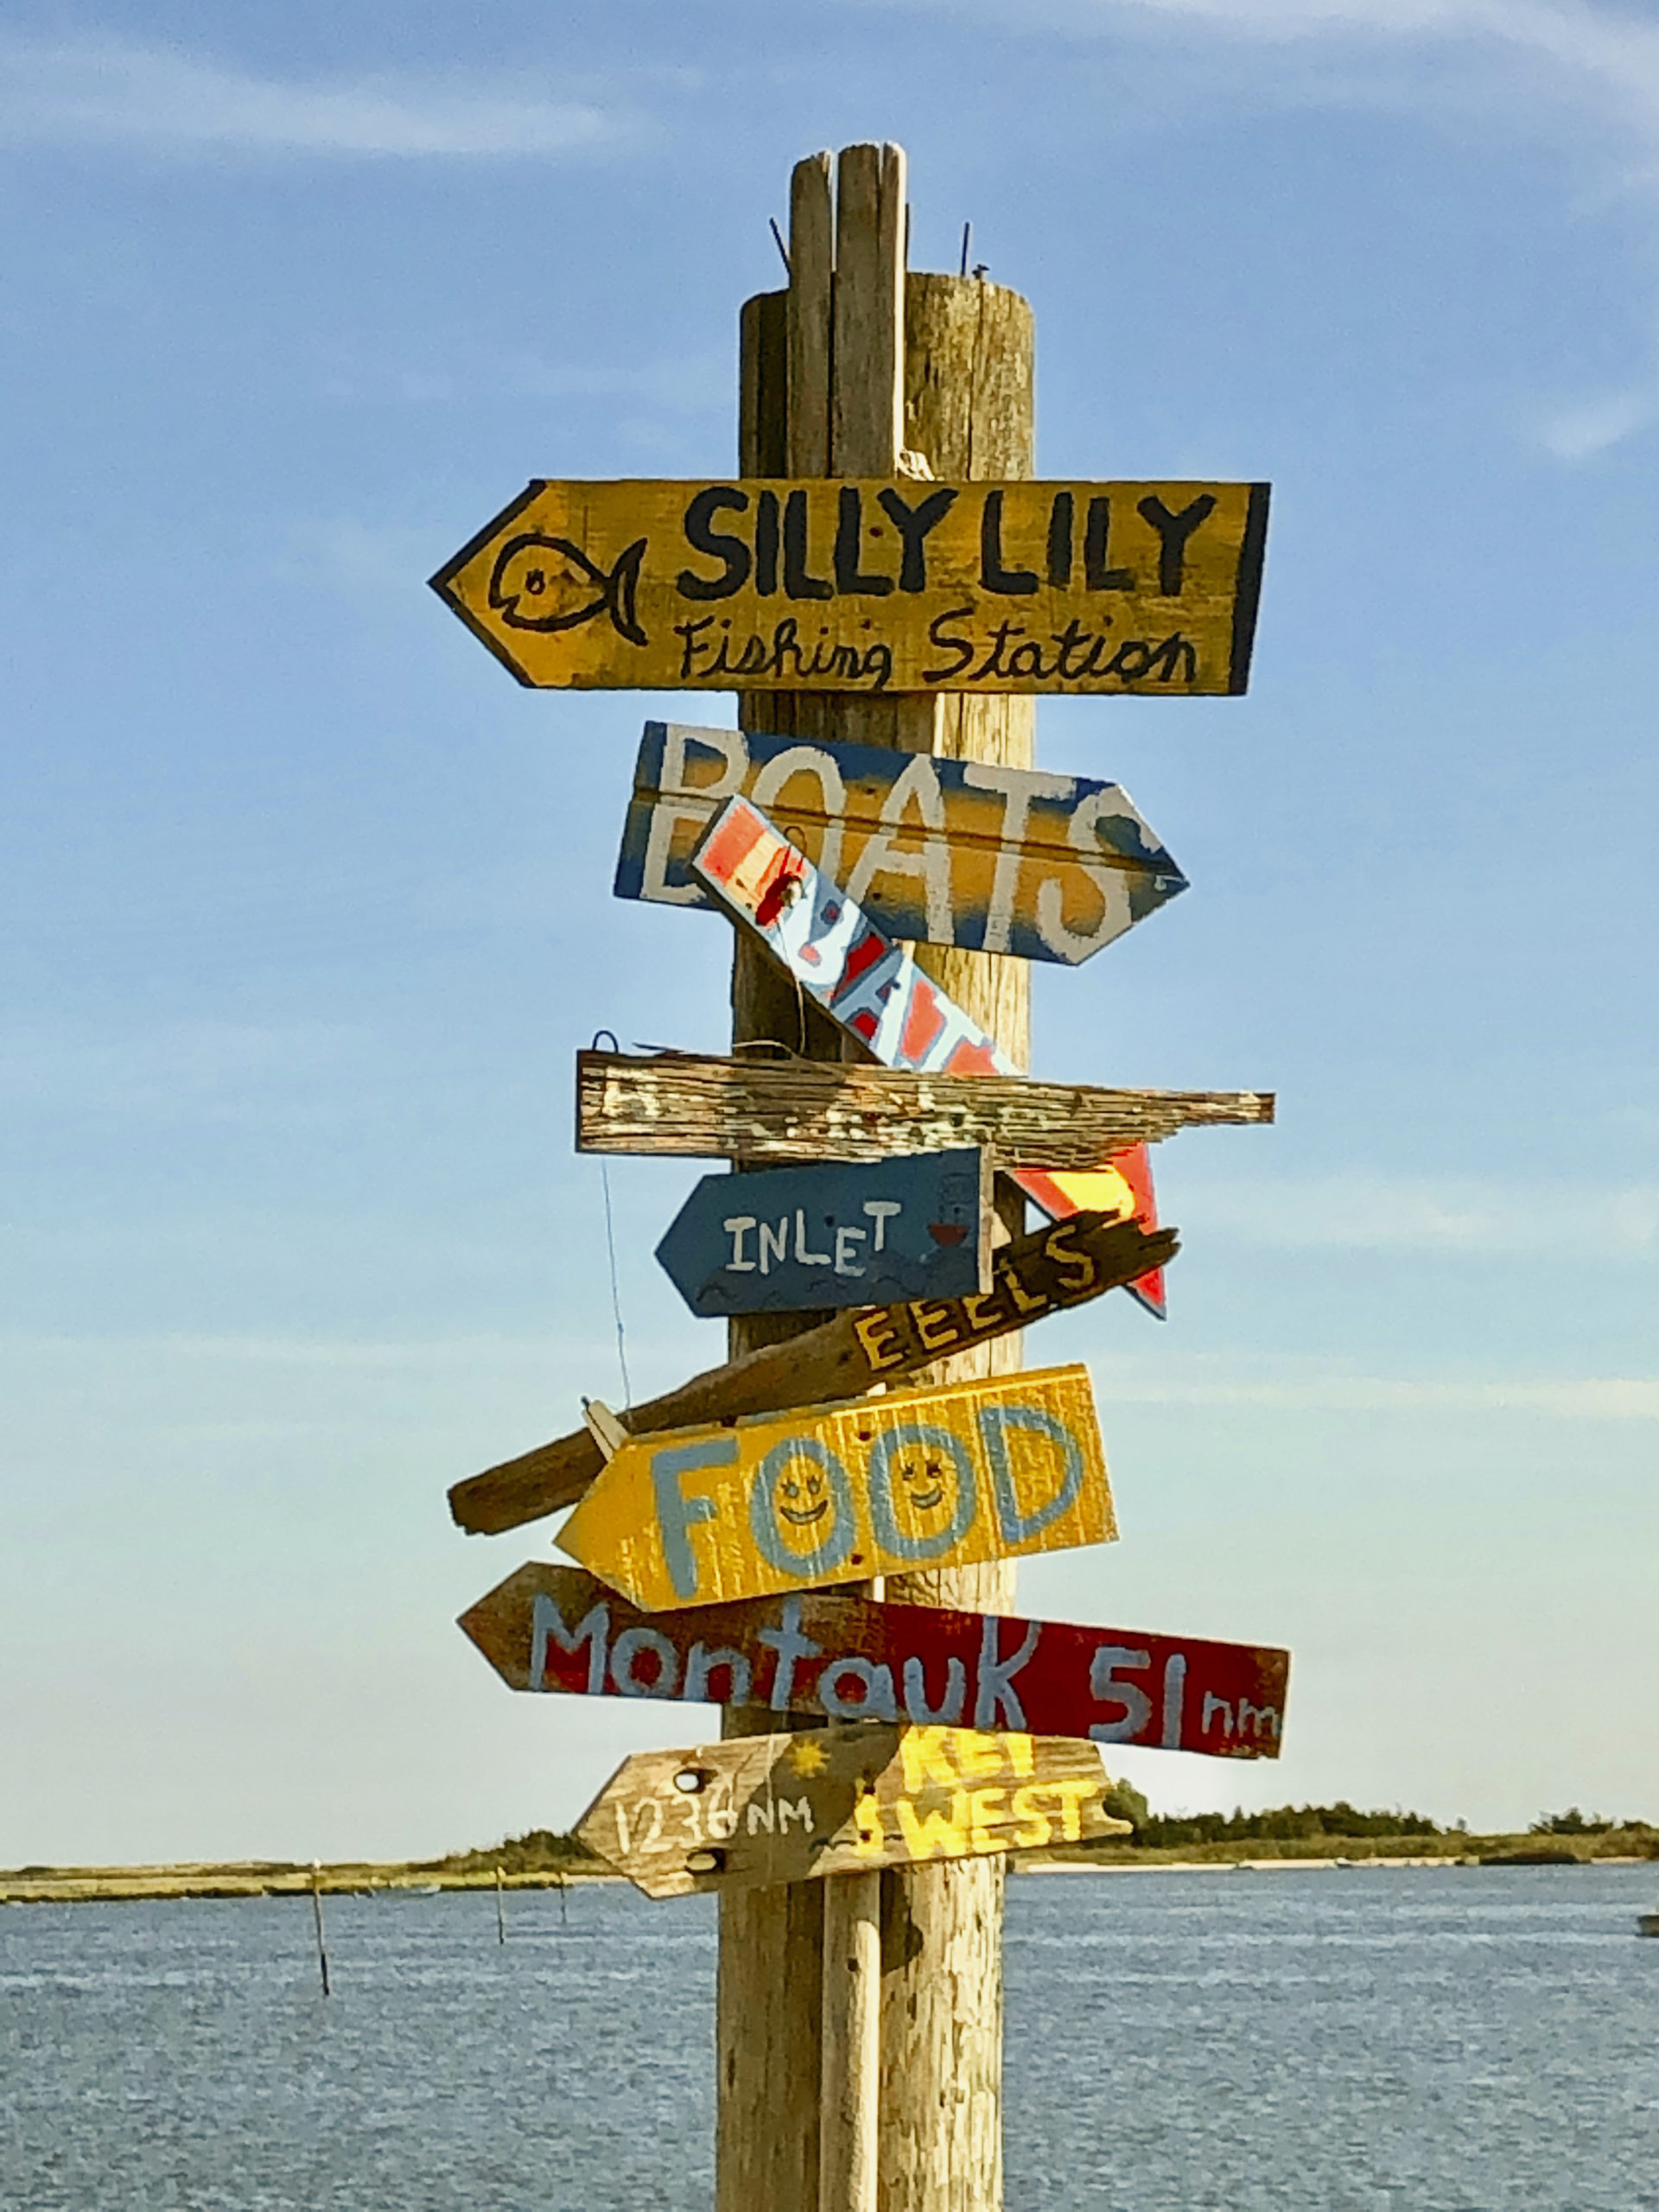 Silly Lily is a 1930s fishing station in East Moriches that has been brought back to life.